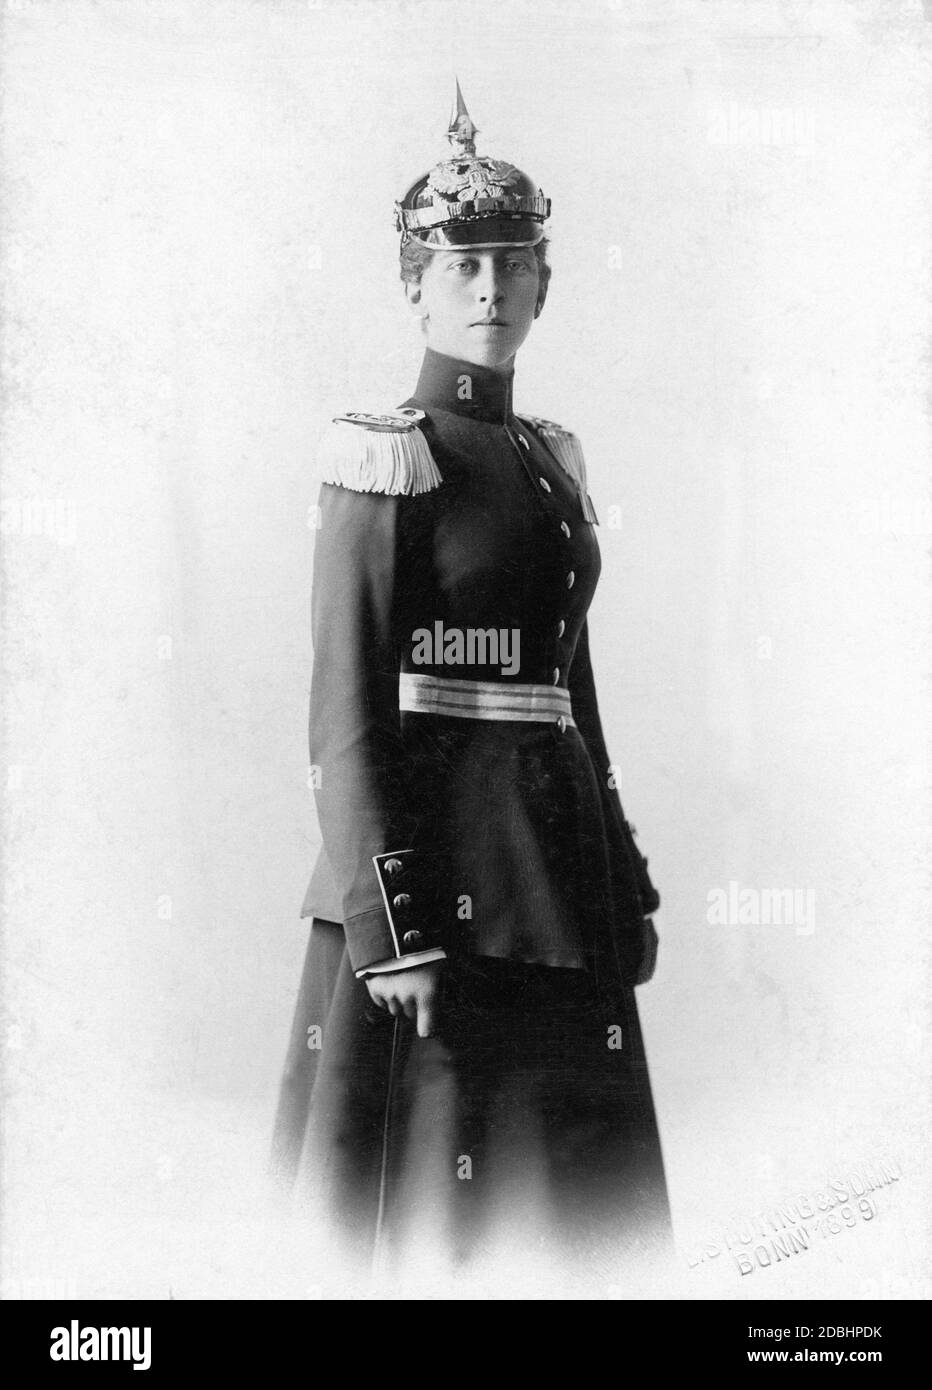 Princess Viktoria of Schaumburg-Lippe (born of Prussia, sister of Wilhelm II) in the uniform of the 5th Westphalian Infantry Regiment No. 53. She served as regiment commander as of 1898. Photograph taken by the court photographers L. Stueting & Sohn in Bonn in 1899. Stock Photo